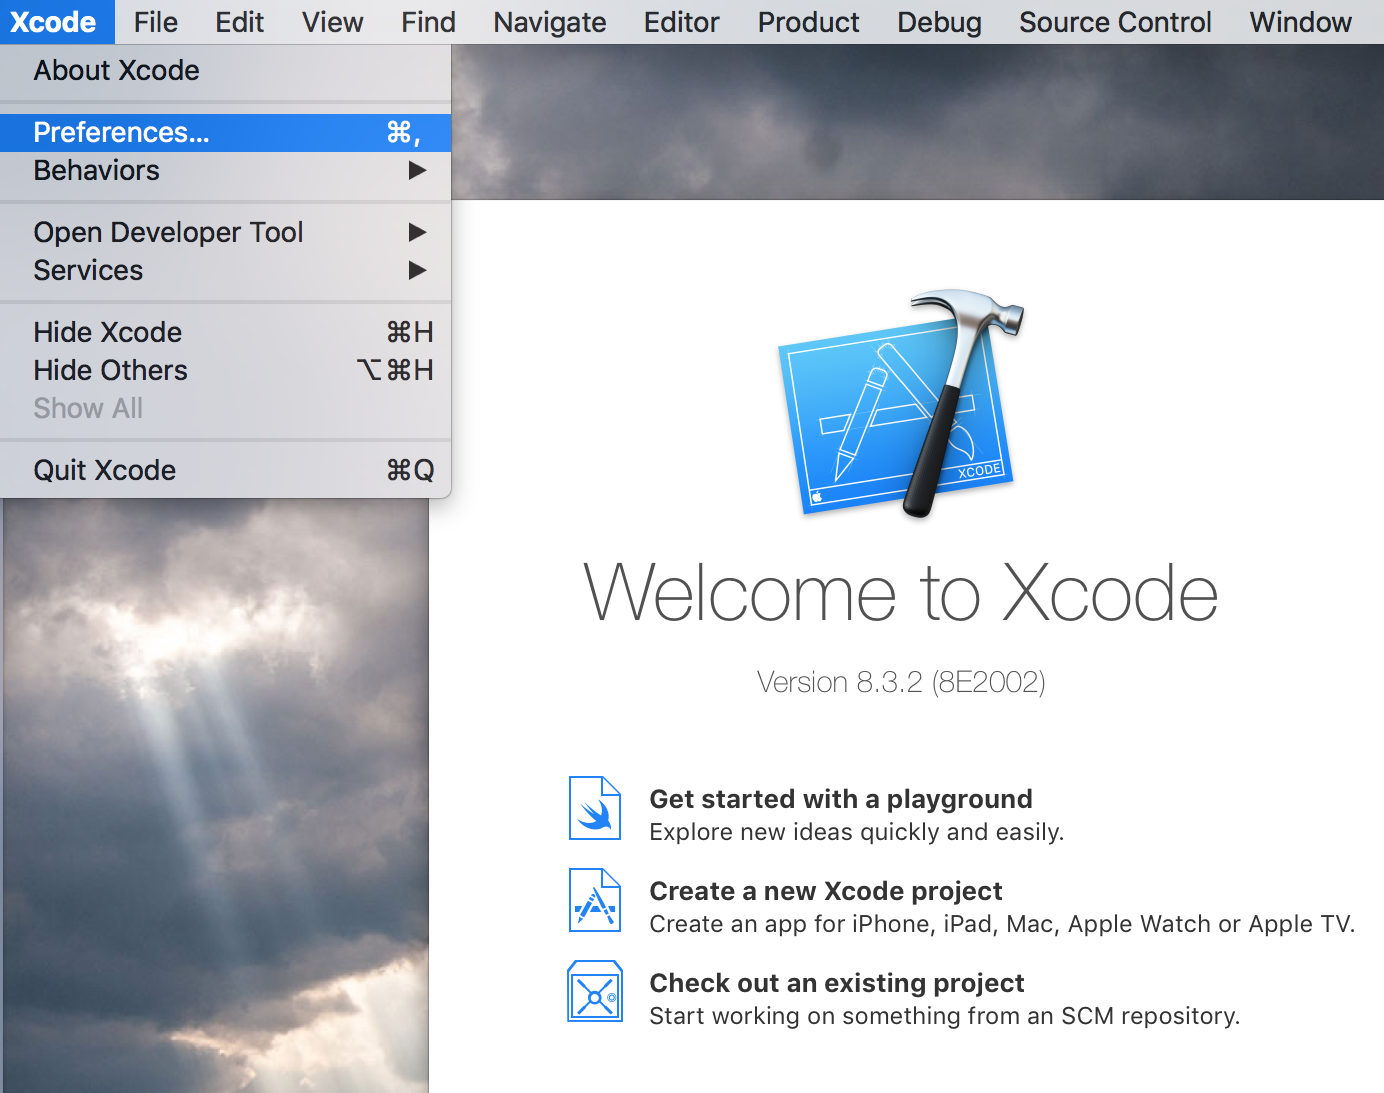 Xcode Welcome screen